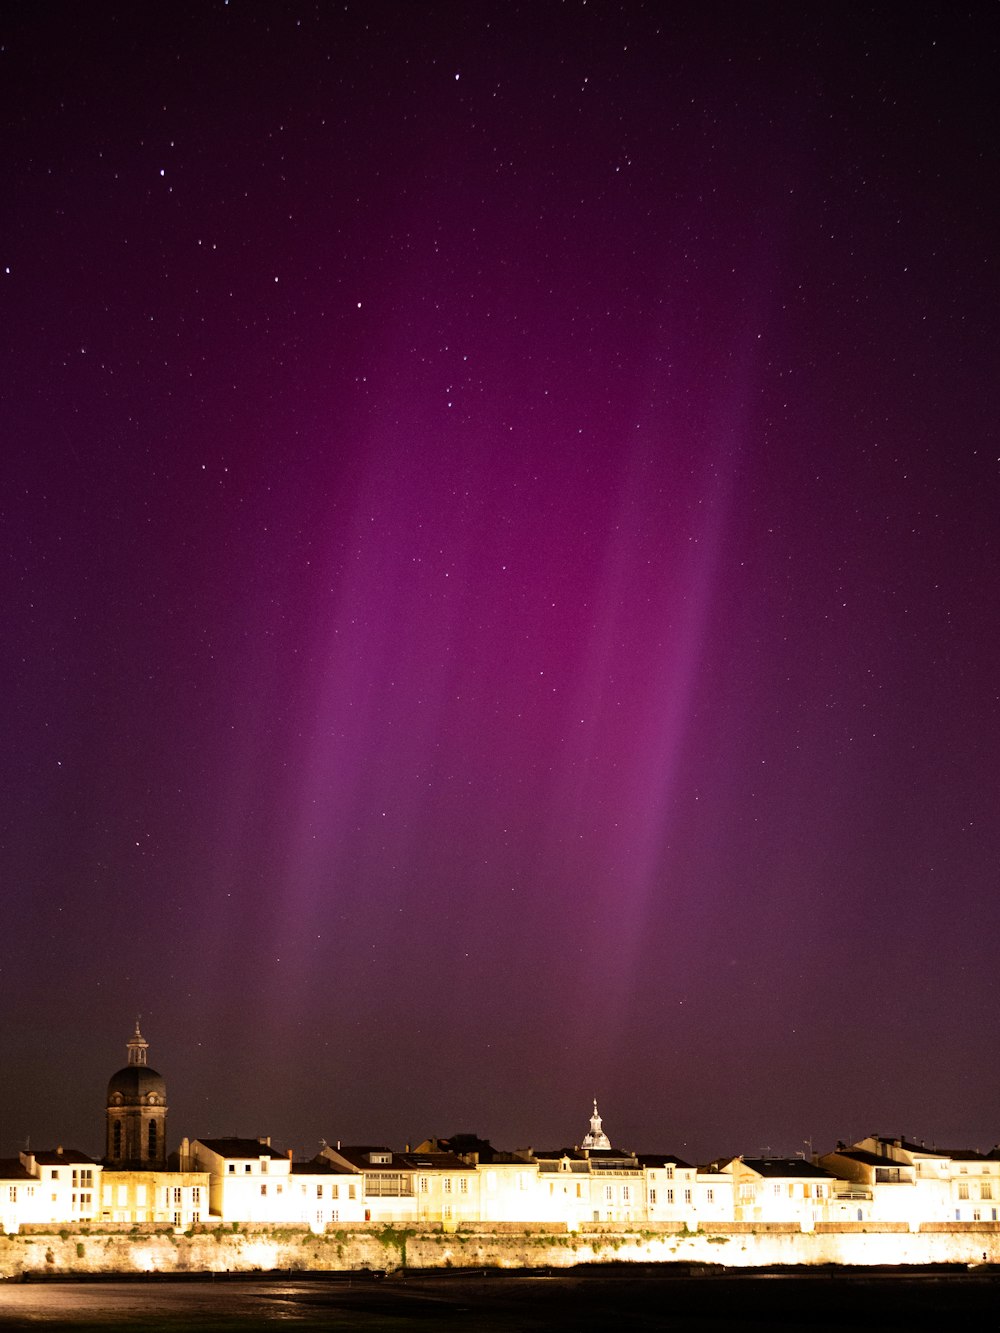 the aurora lights shine brightly in the night sky over a city